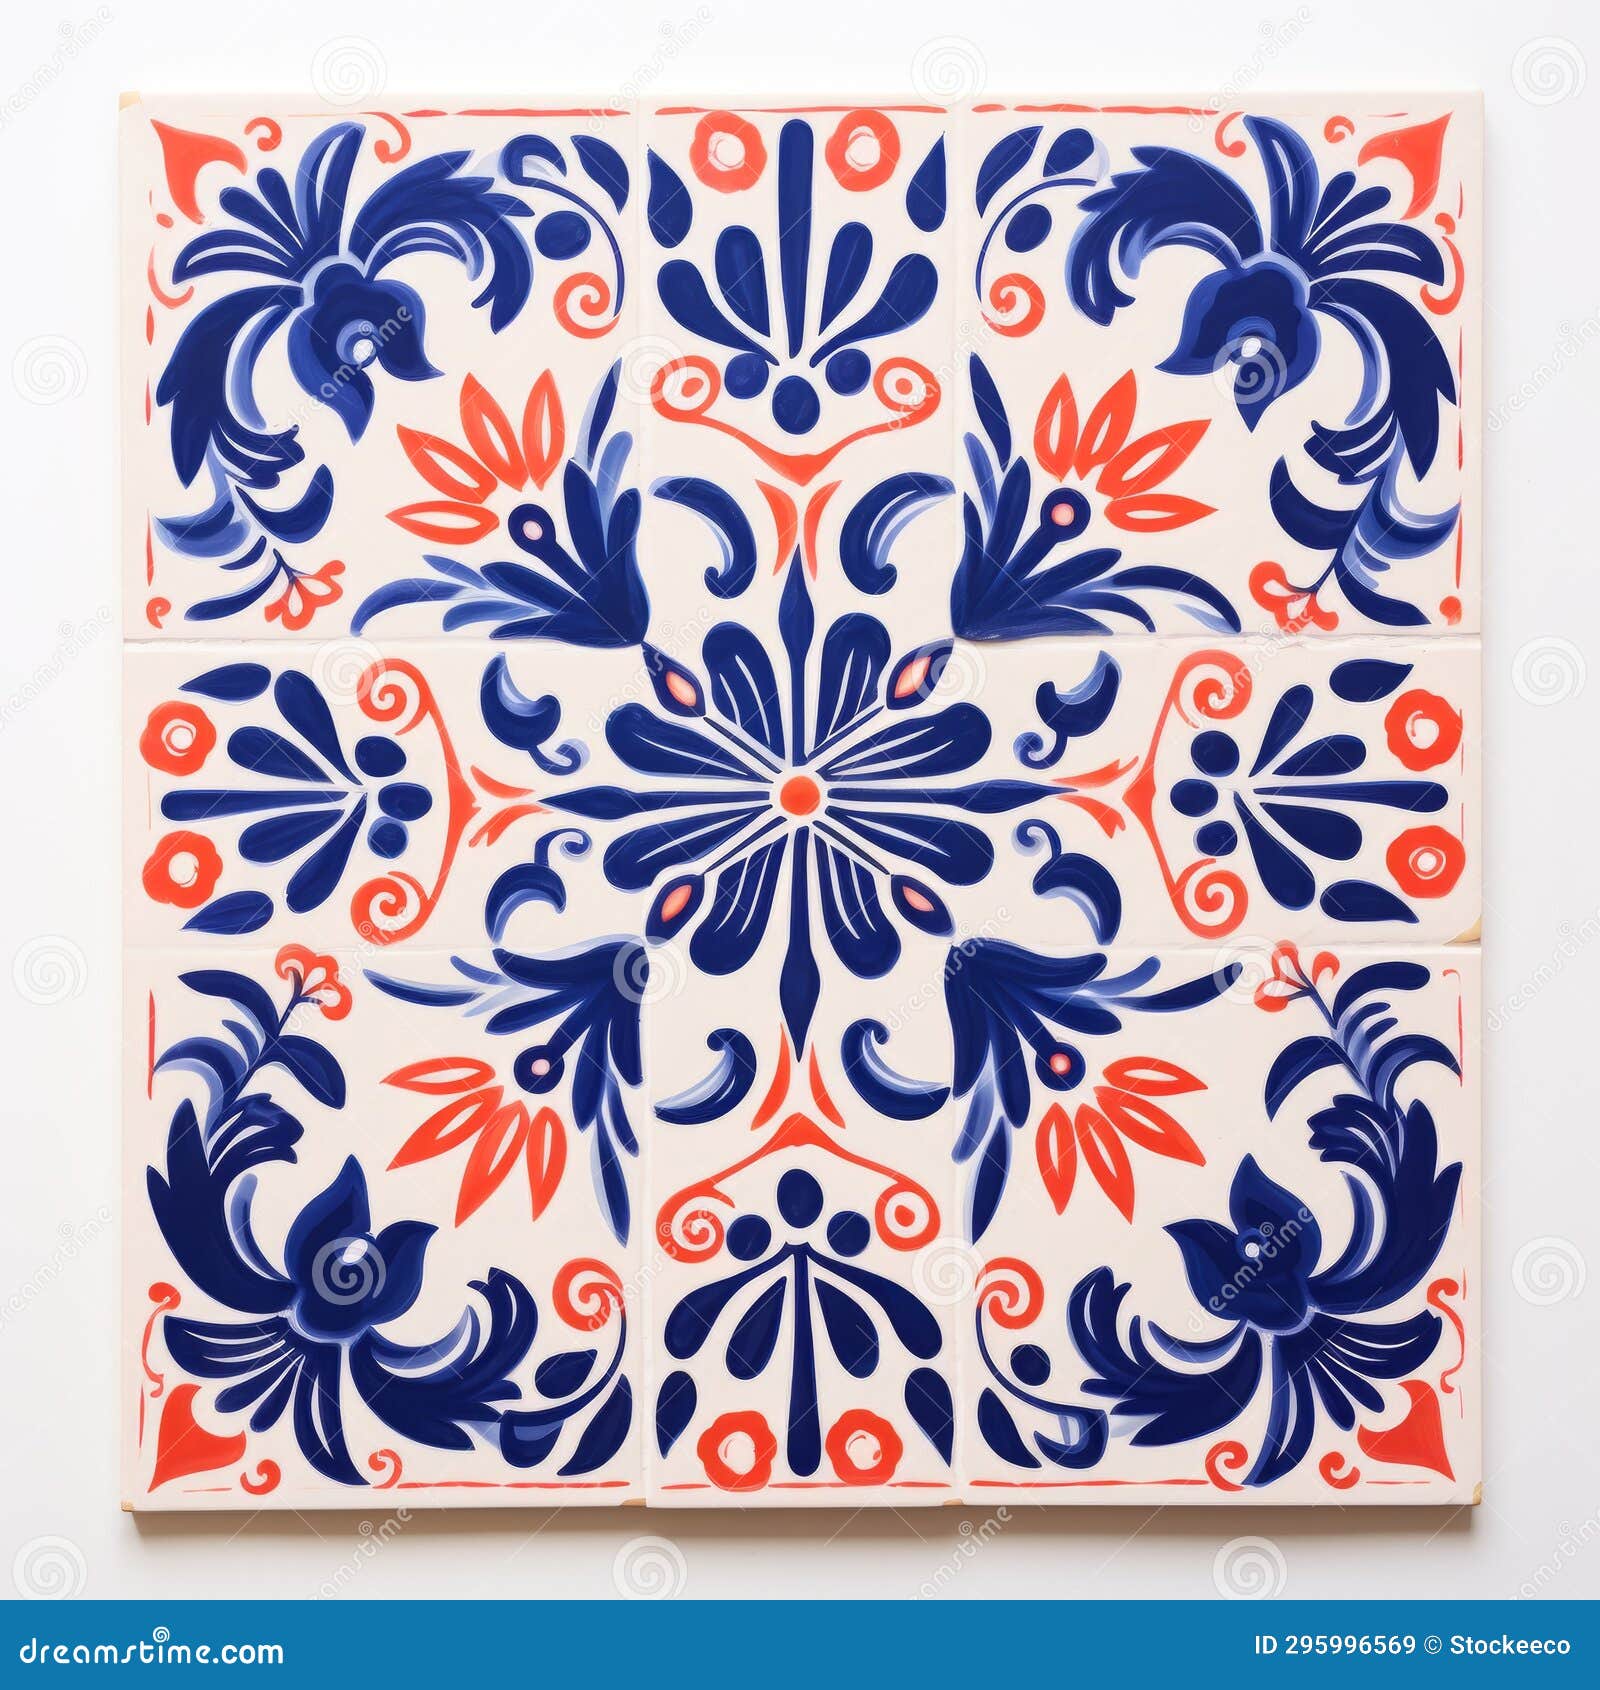 mexican tile  inspired by james jean with risograph printing